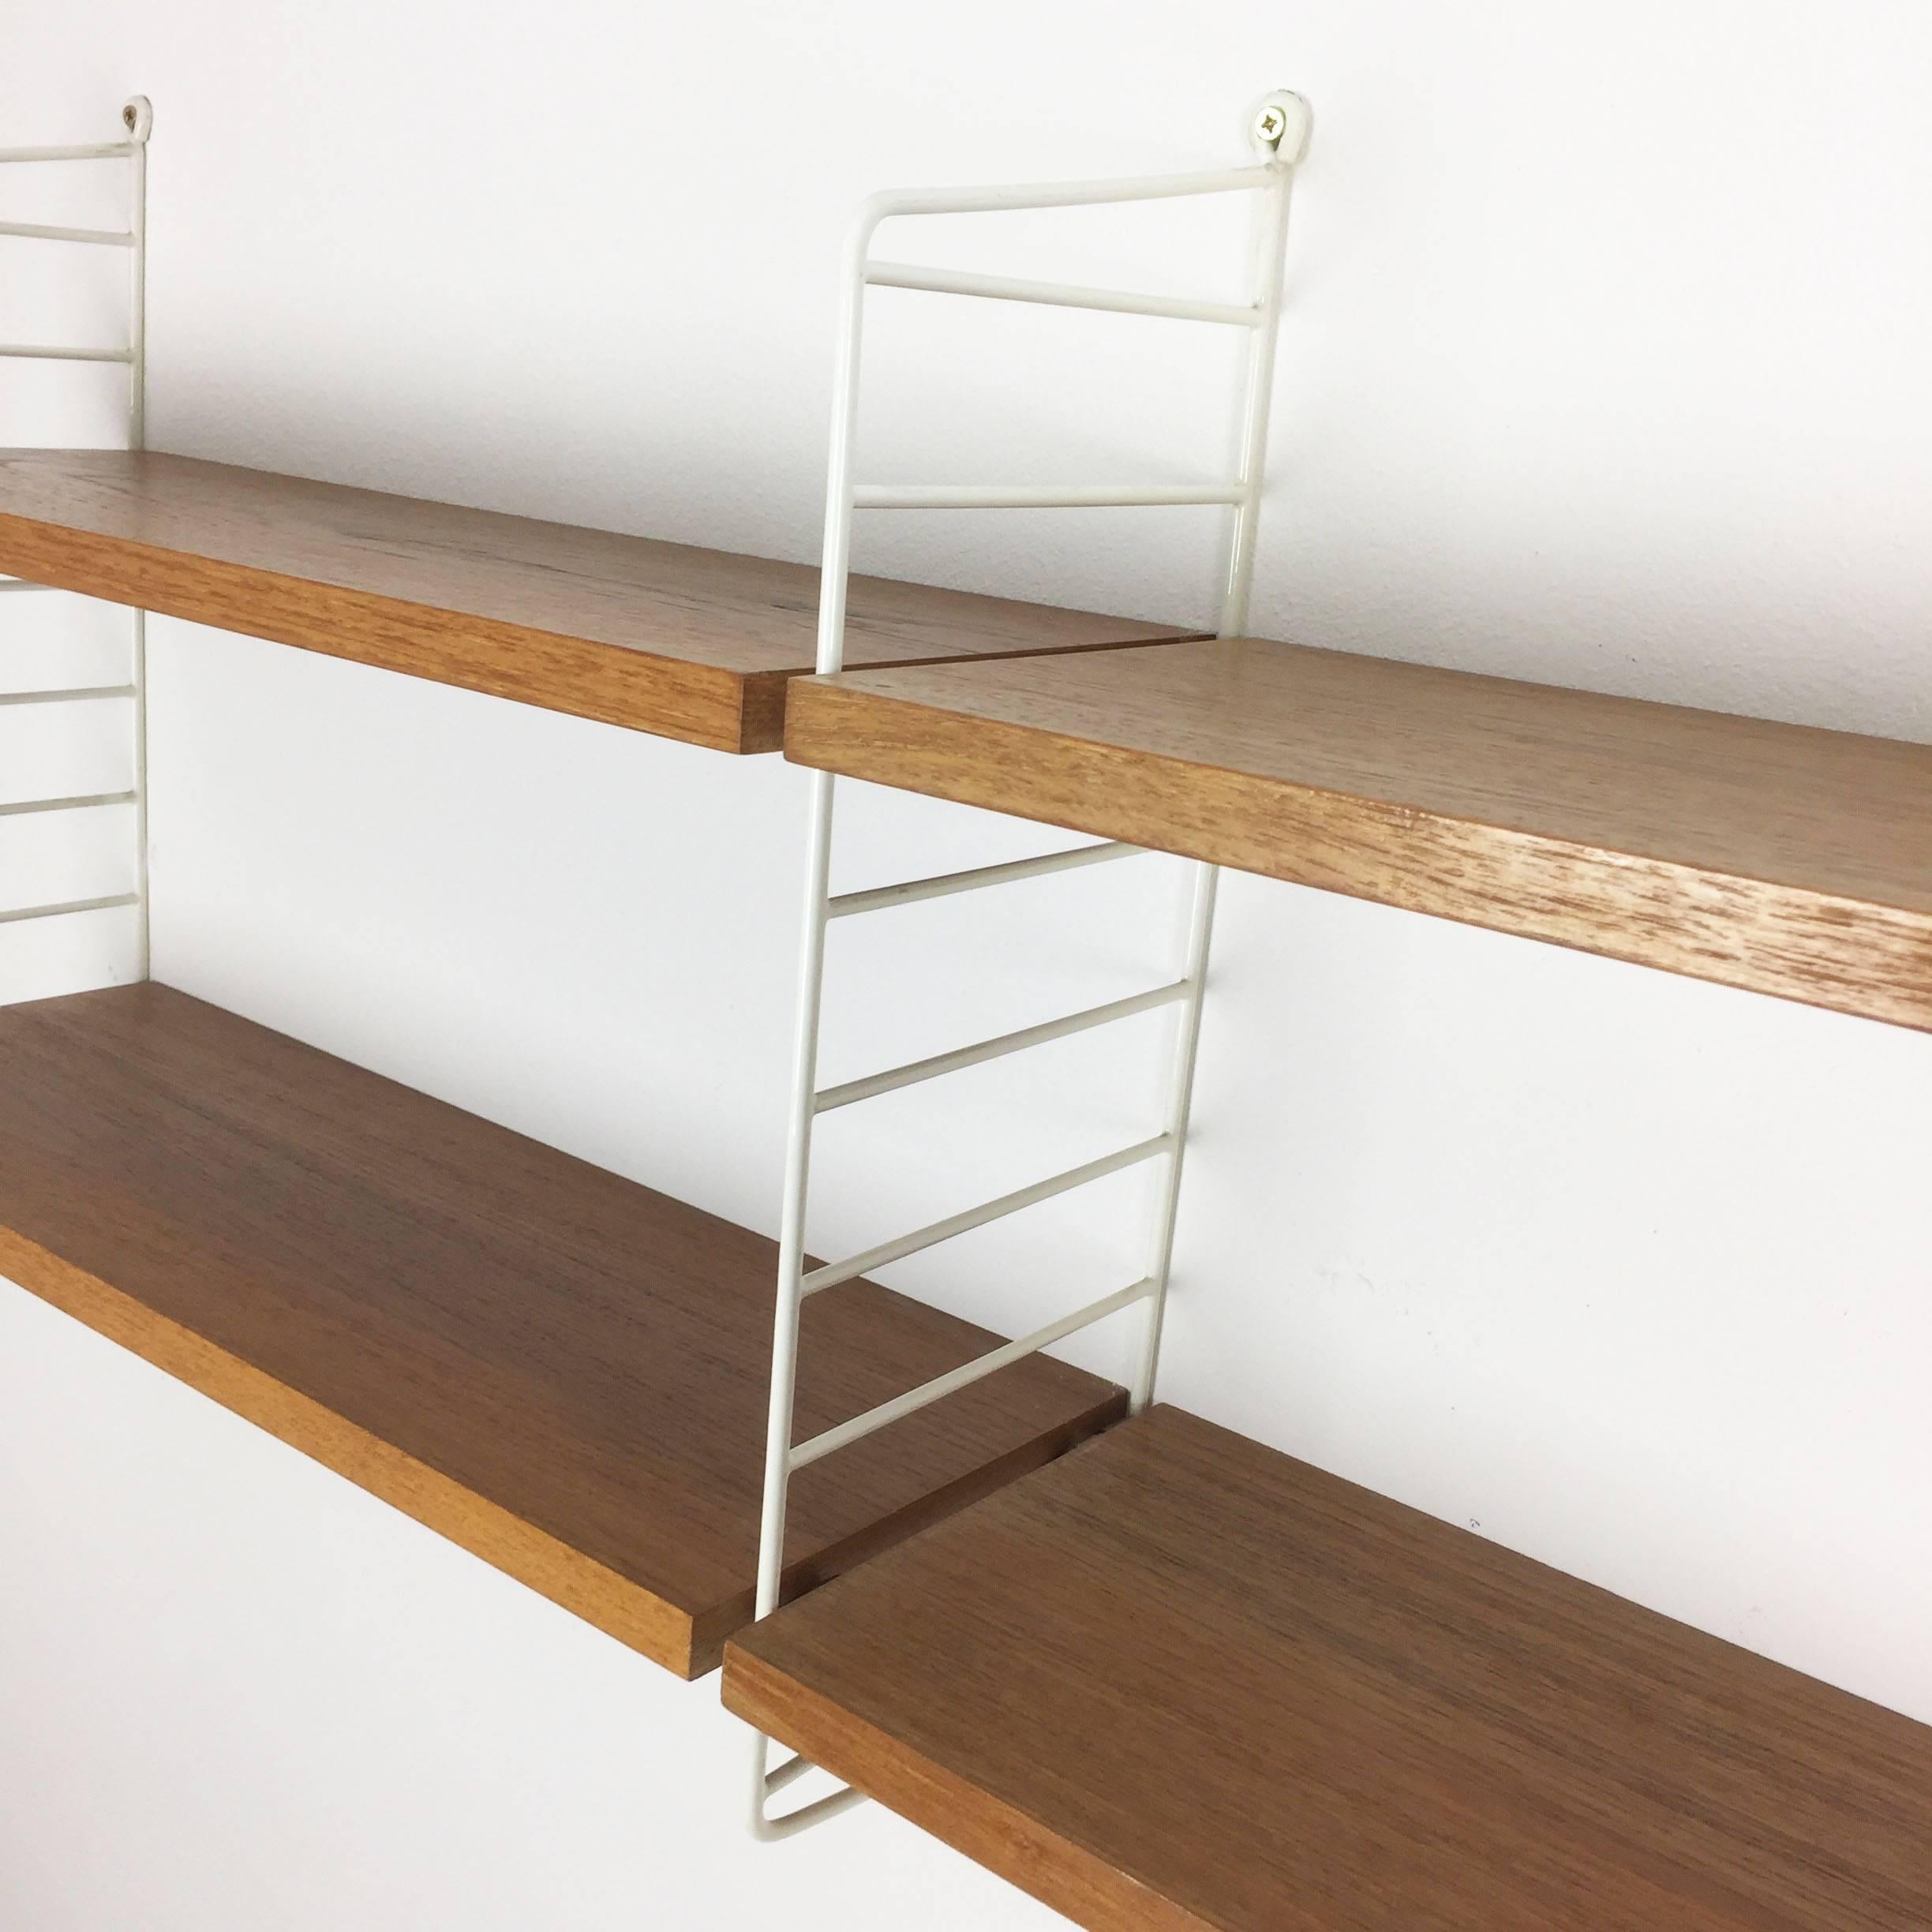 String Regal wall unit

Made in Sweden

Bokhyllan 'The ladder shelf'

Design: Nils und Kajsa Strinning, 1949

The architect Nisse Strinning was born in 1917. From 1940 to 1947 he studied architecture in Stockholm, before he designed the